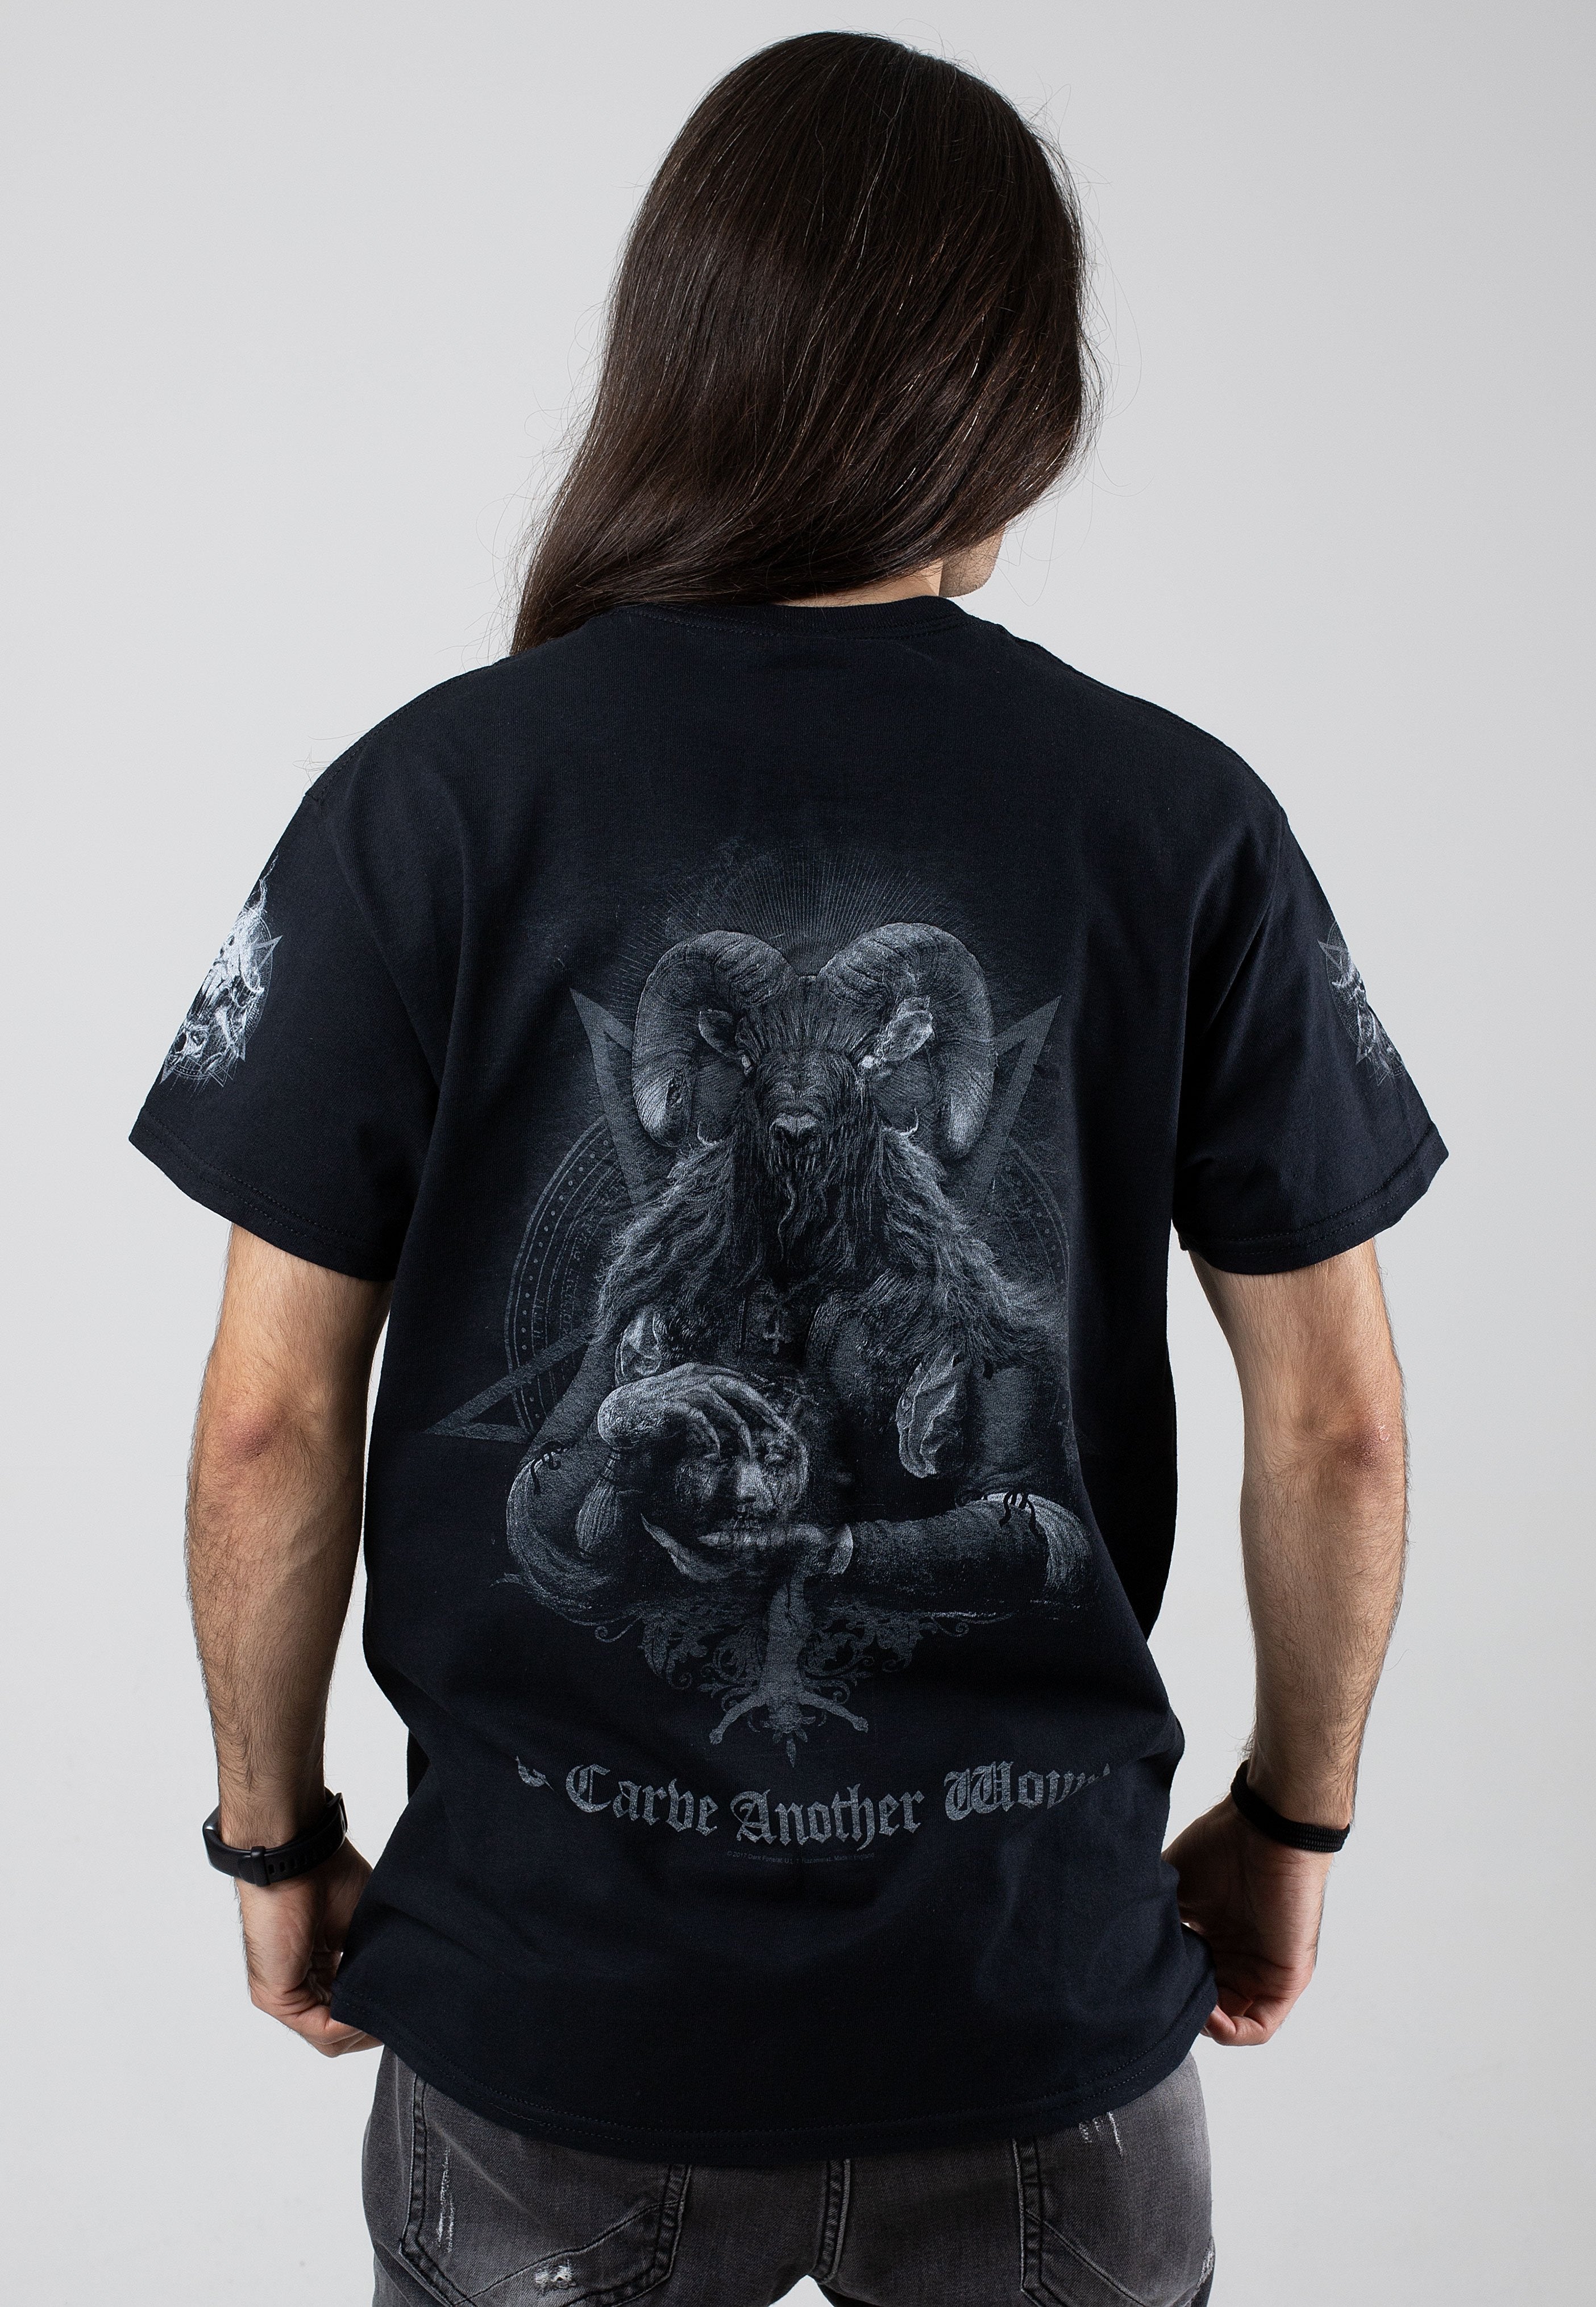 Dark Funeral - To Carve Another Wound - T-Shirt